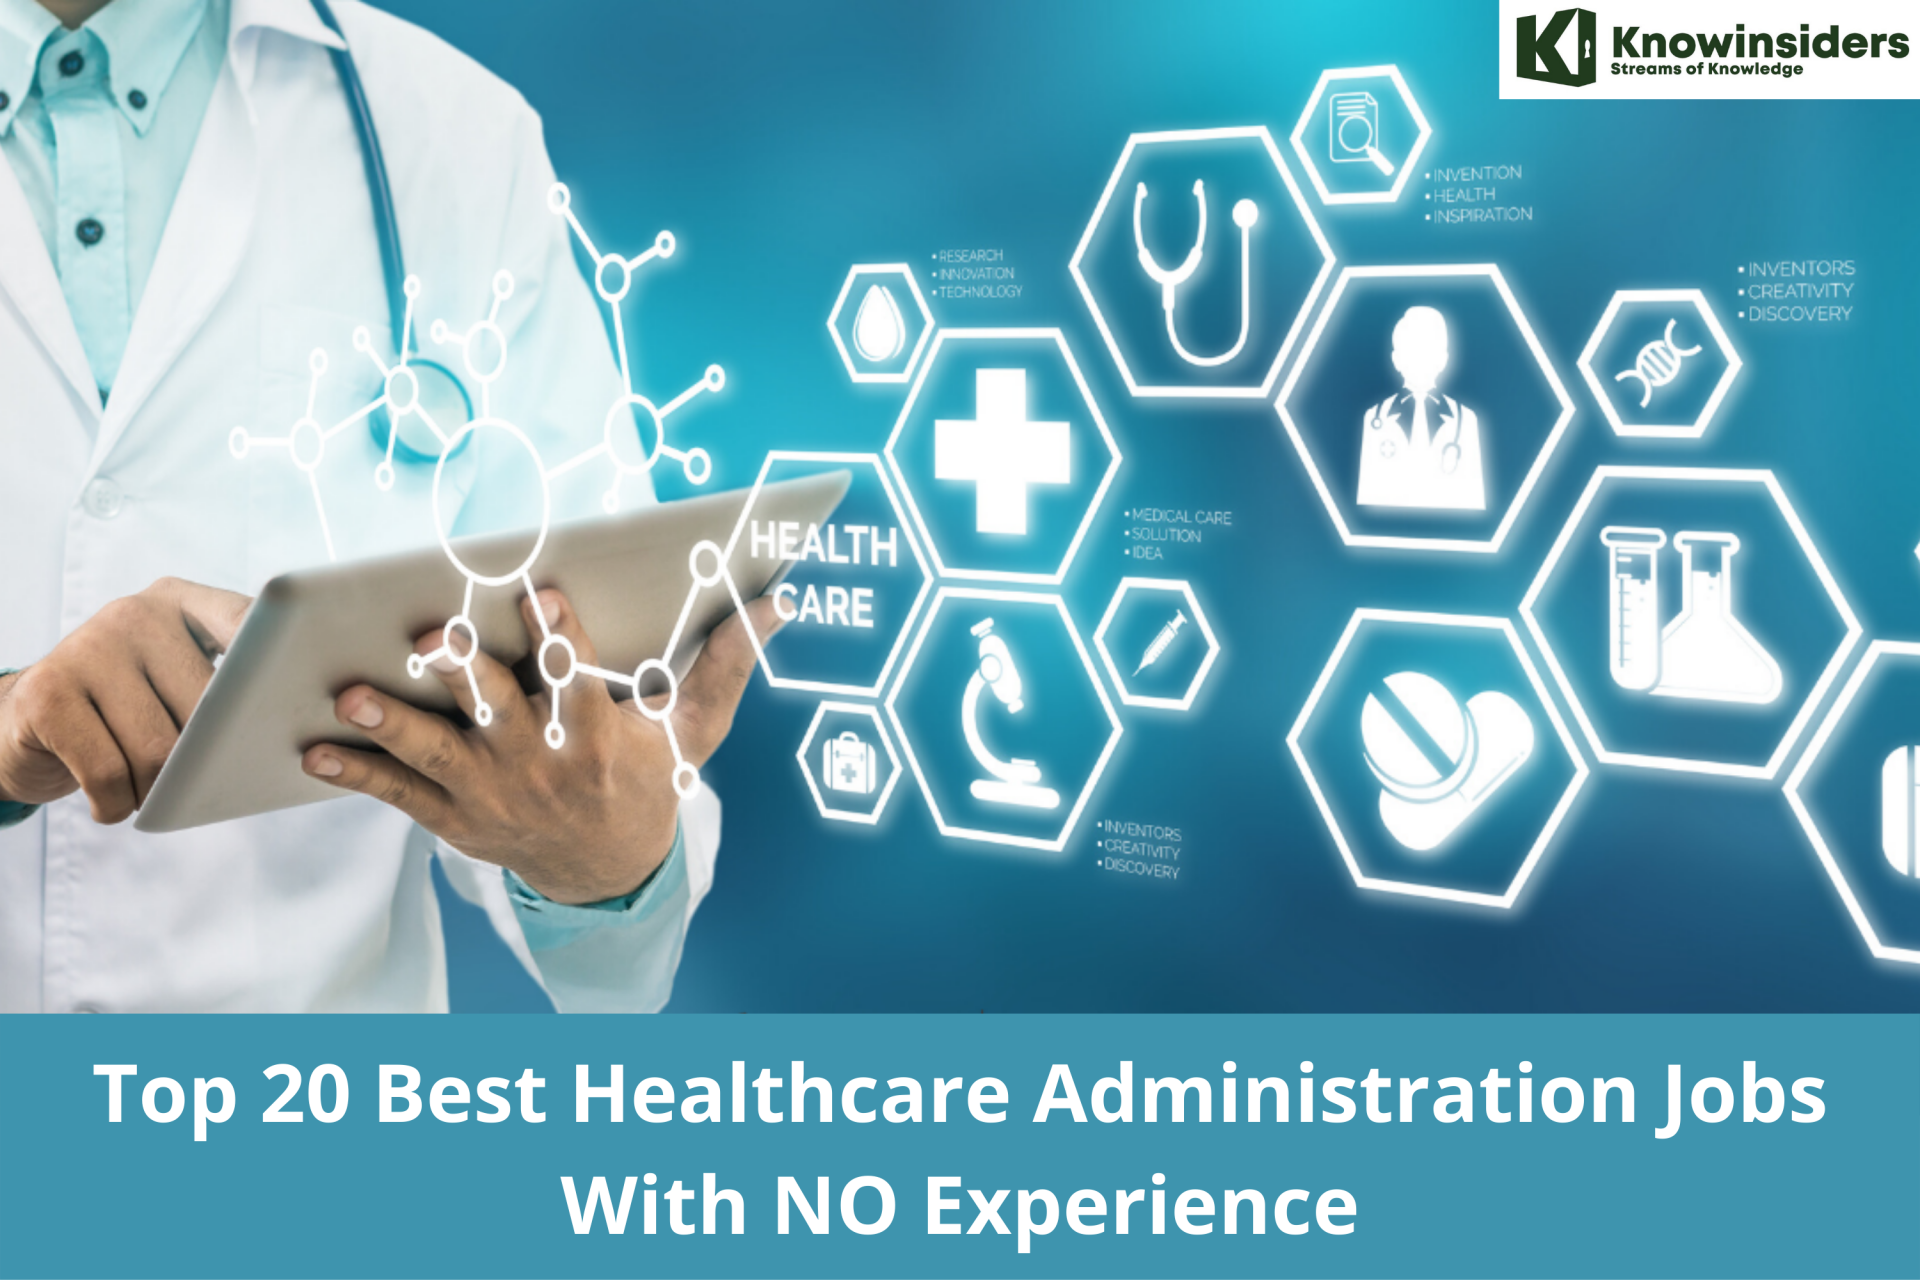 Top 20 Best Healthcare Administration Jobs For Recent Graduates With No Experience